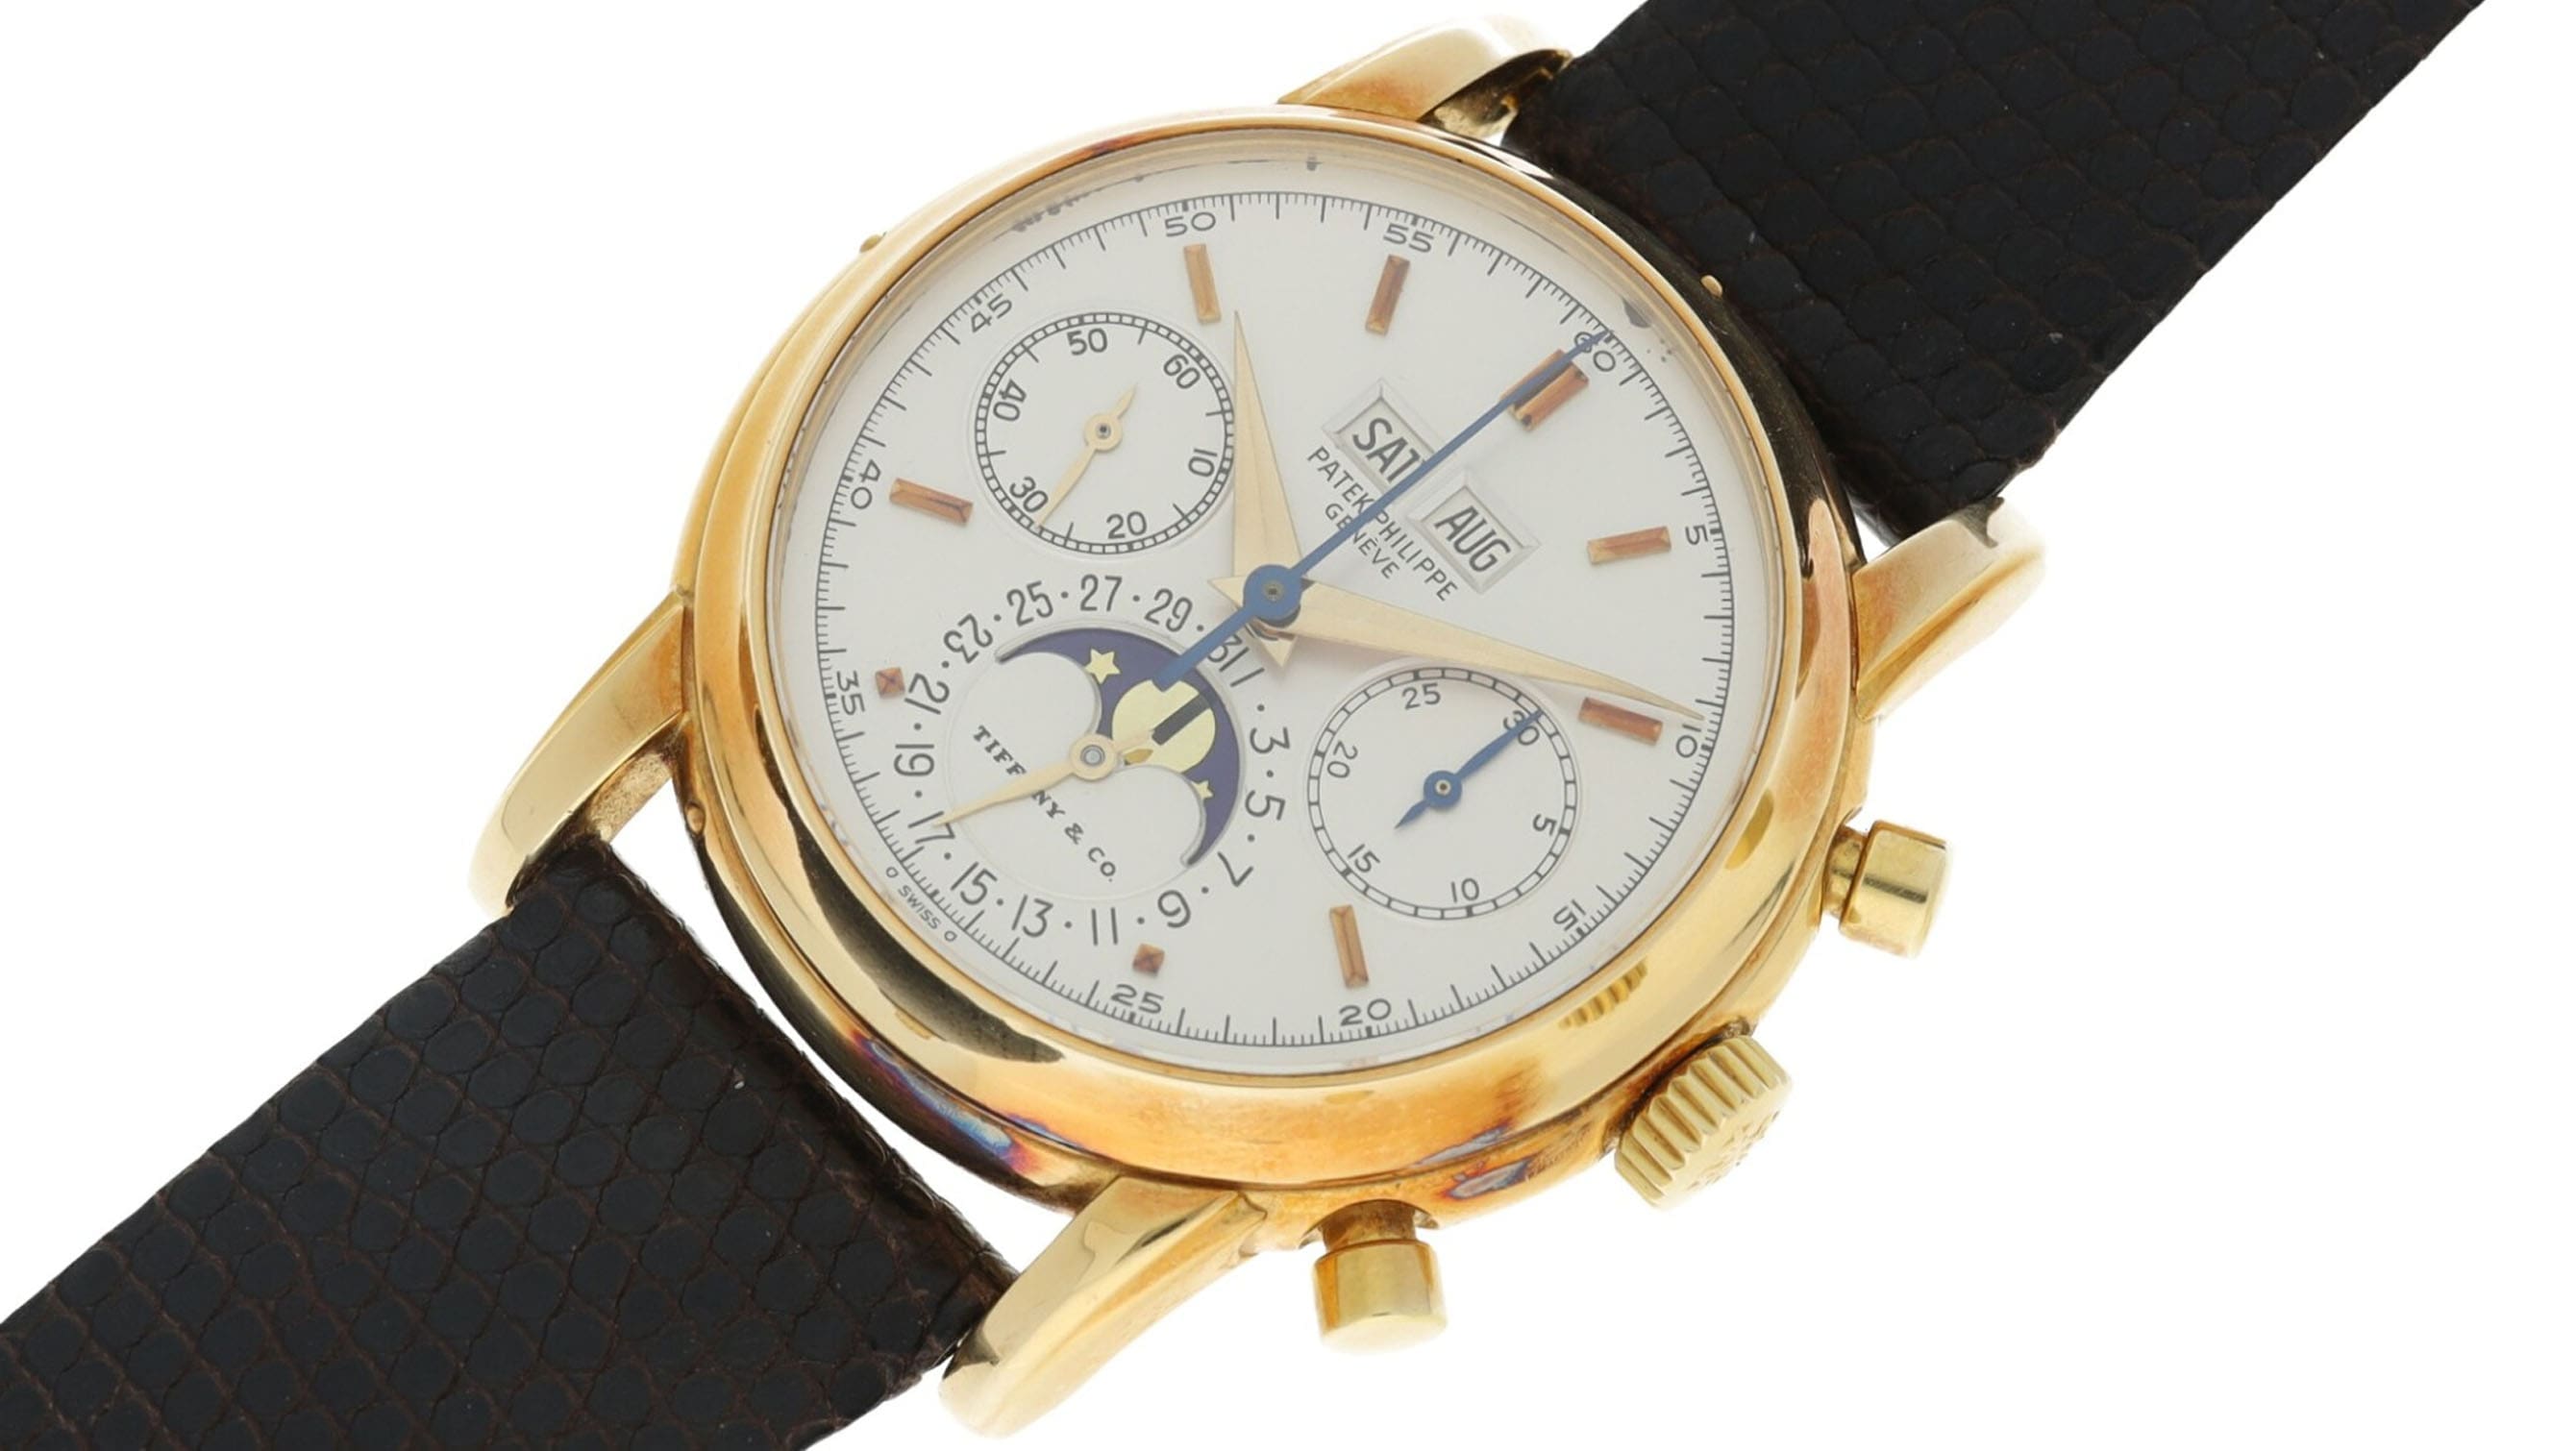 The heroes and bargains of Sotheby’s Important Watches: Part I auction